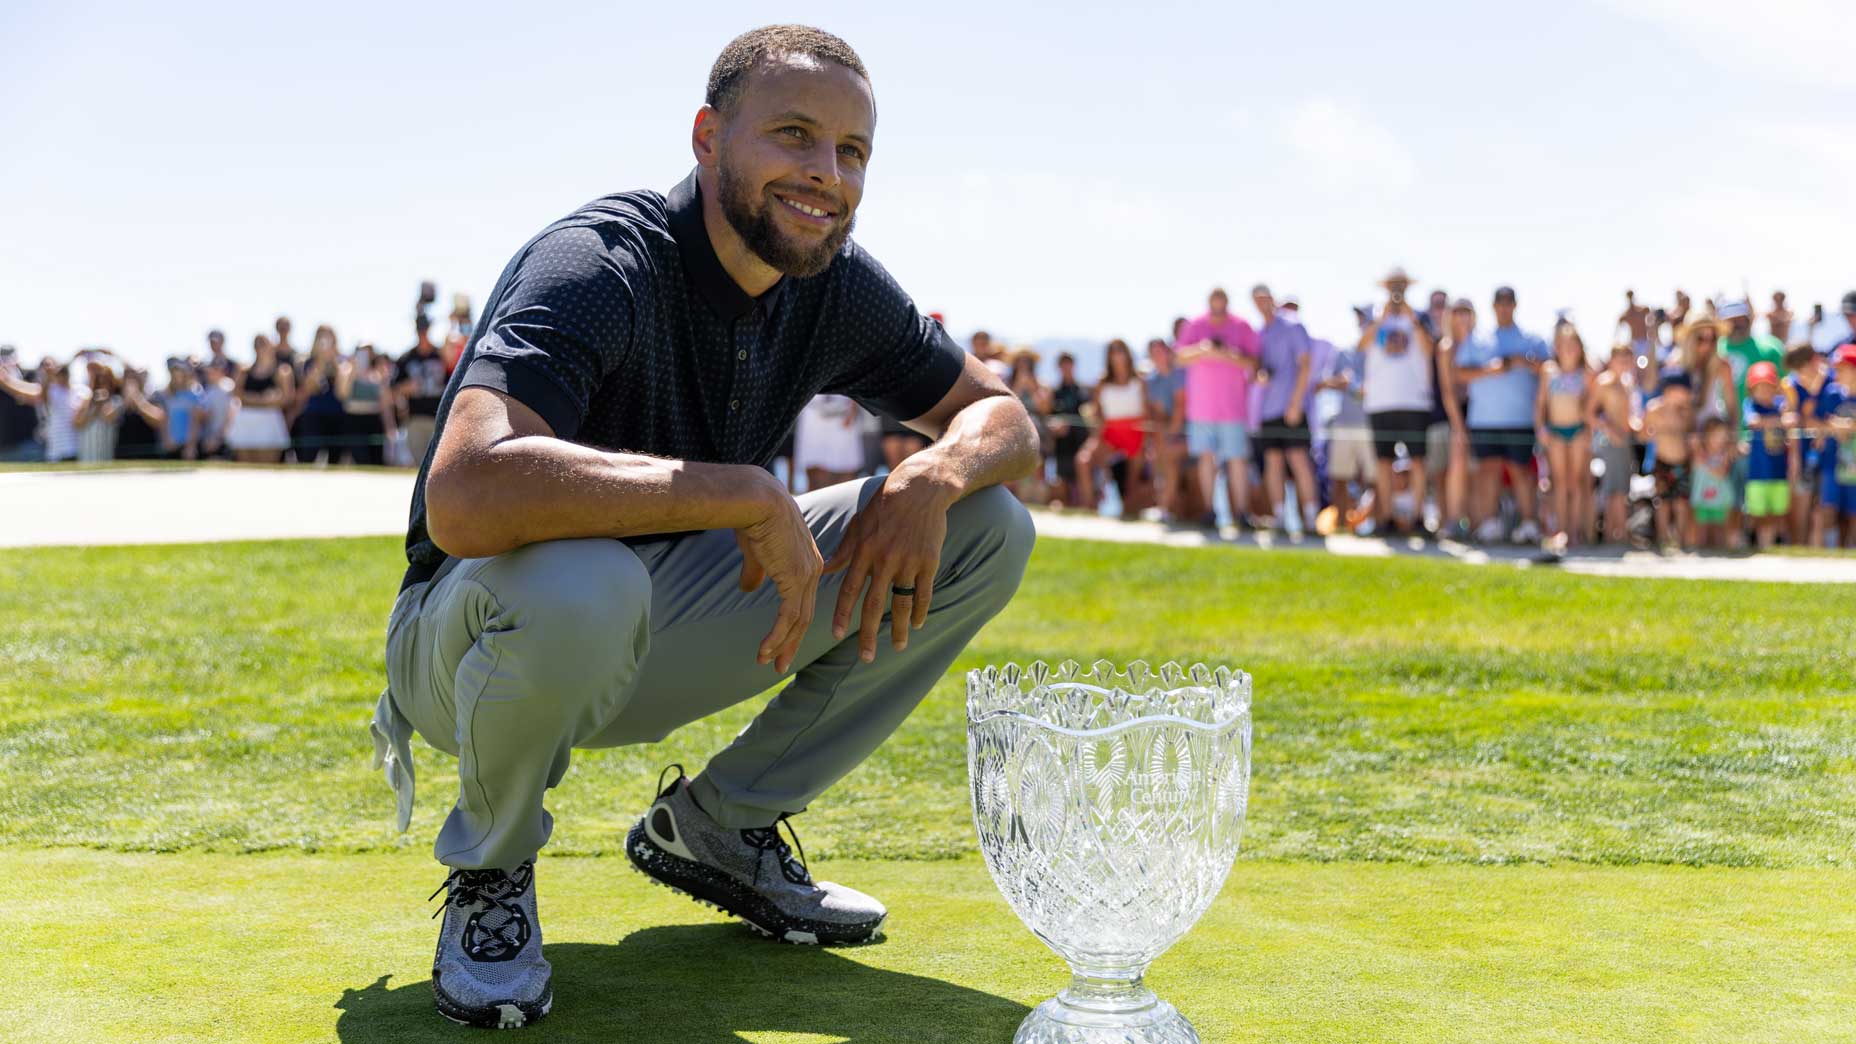 Steph Curry Is Part-Owner Of San Francisco Team In New TGL Golf League